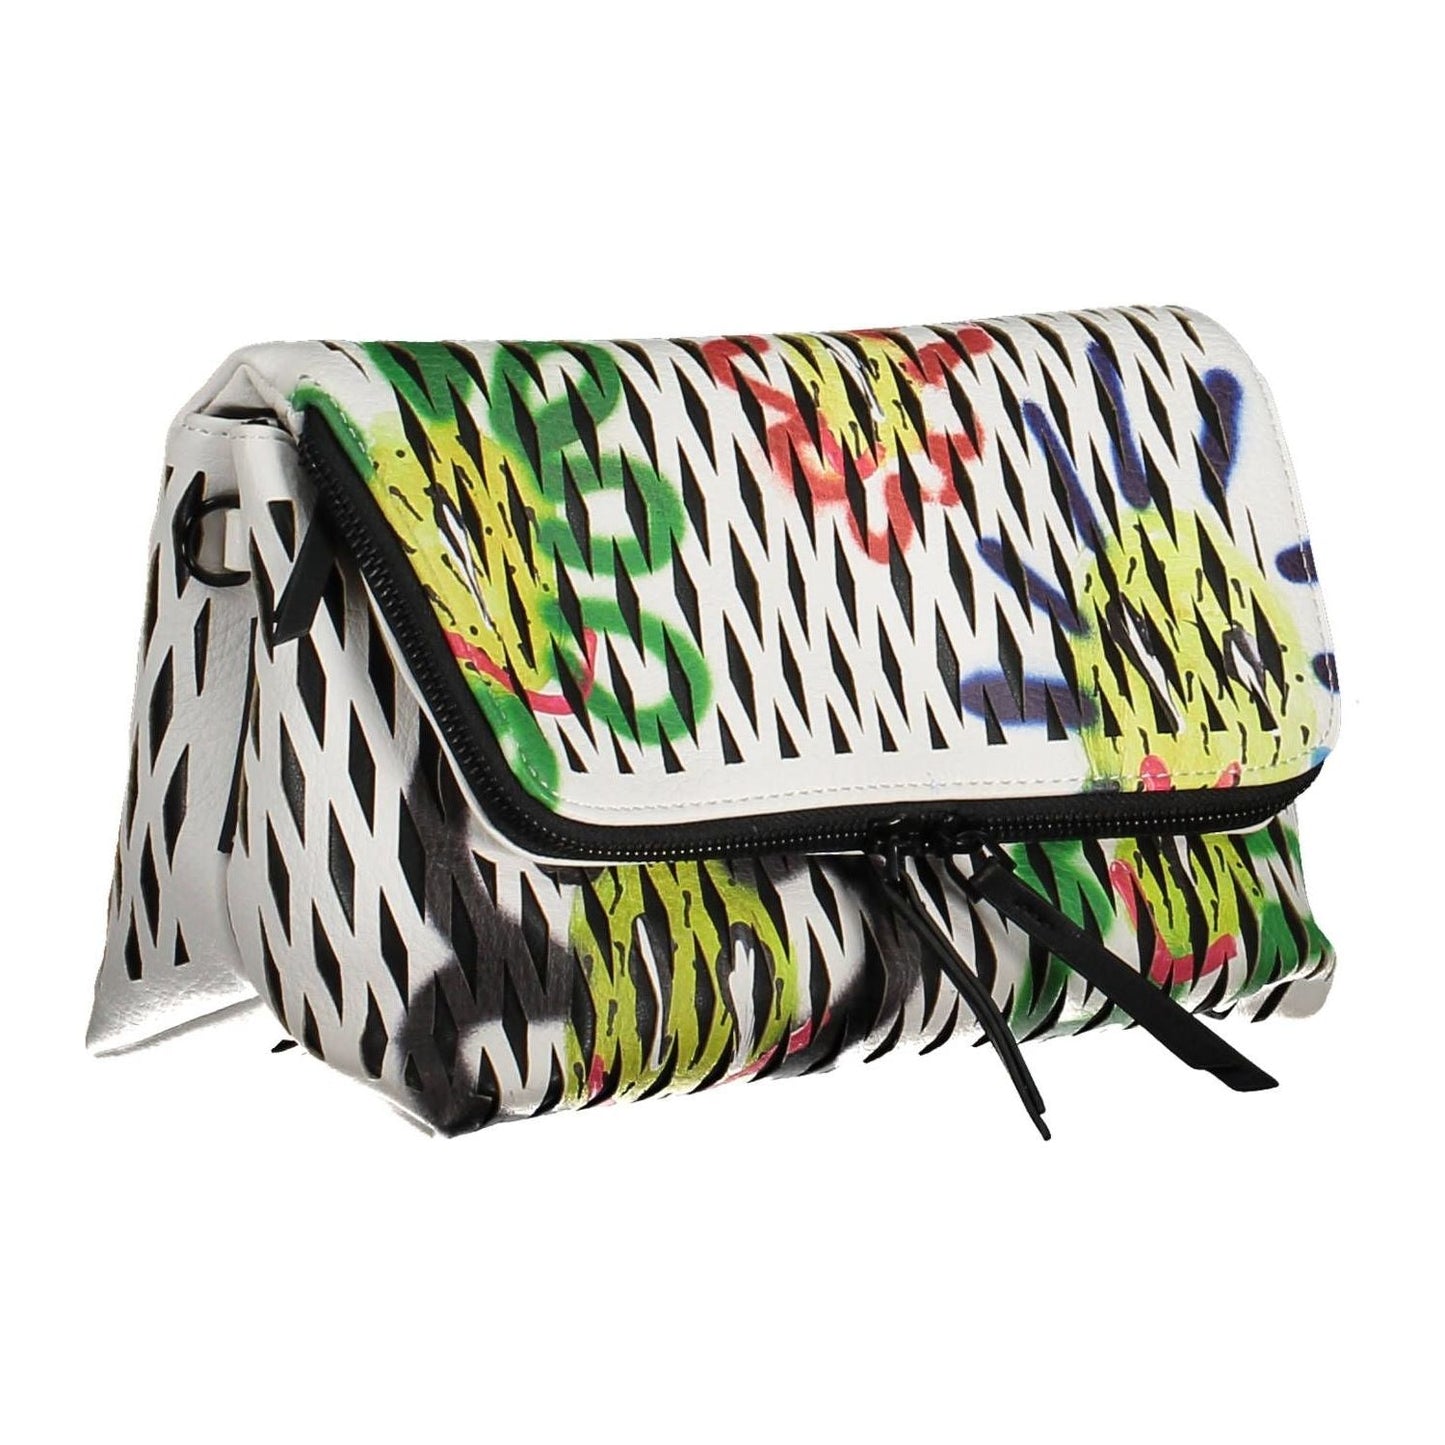 Desigual Chic White Contrasting Details Handbag chic-white-contrasting-details-handbag